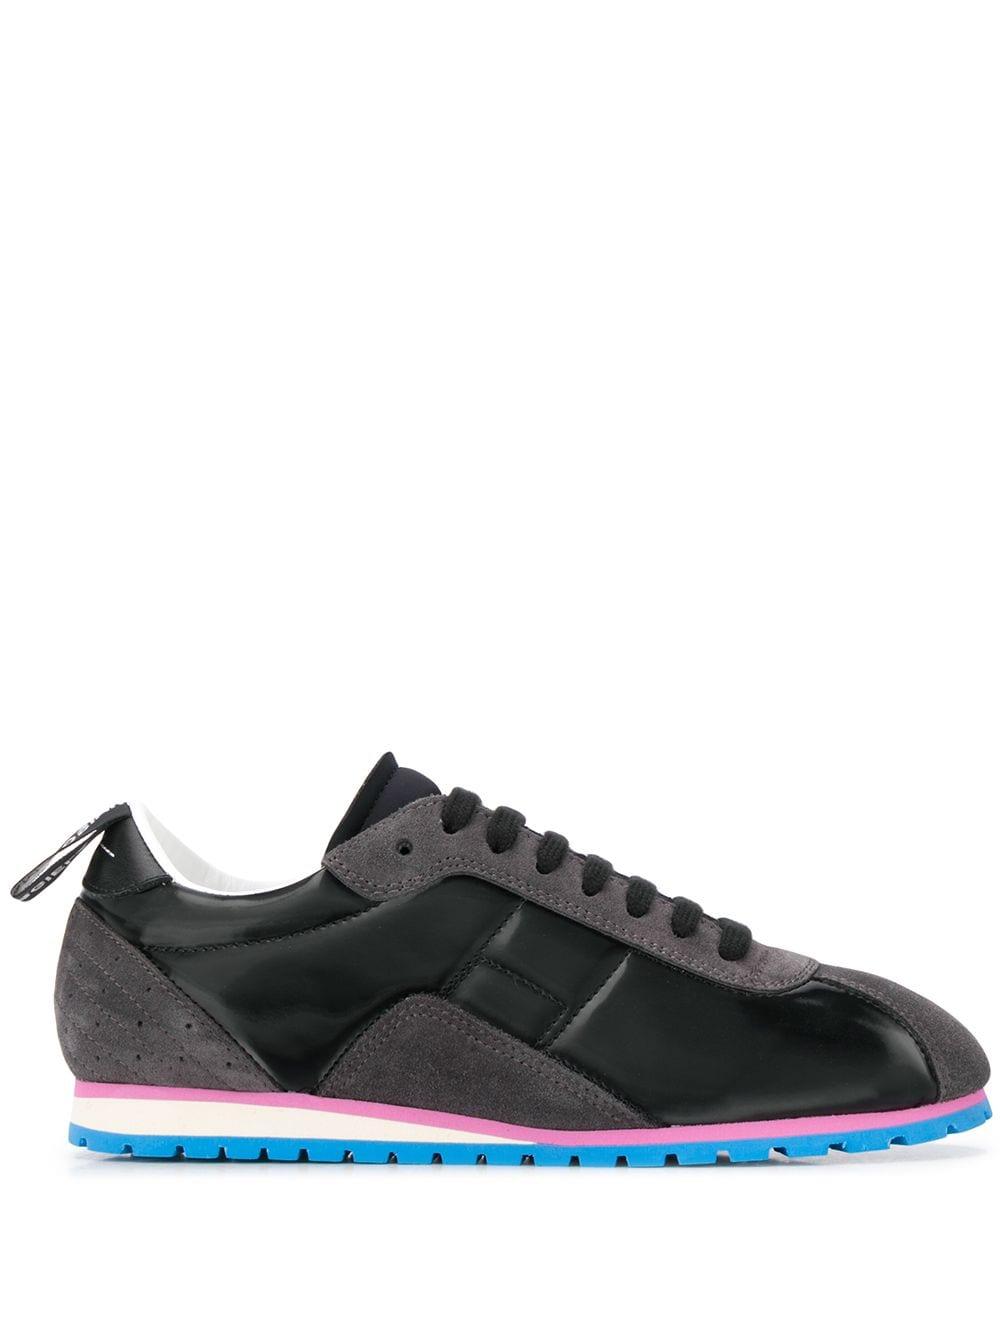 MM6 by Maison Martin Margiela Leather Contrast Sole Sneakers in Black - Lyst